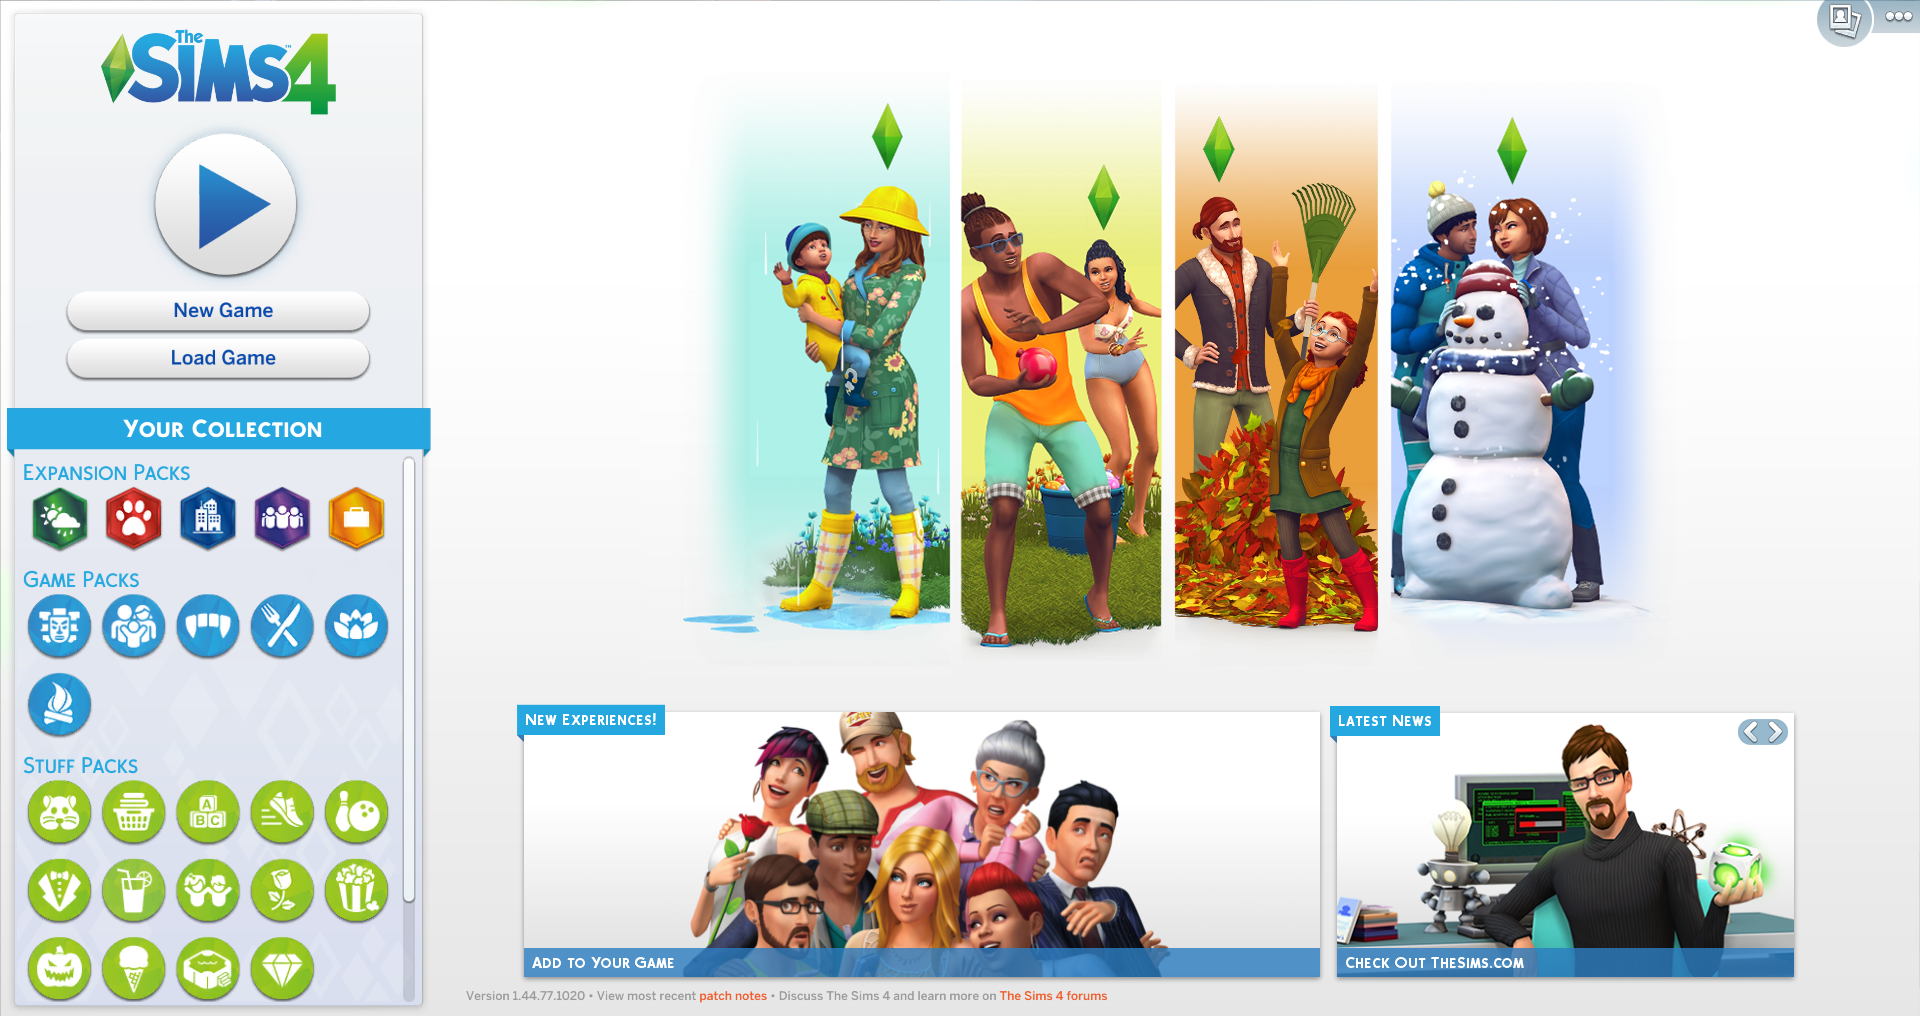 The Sims 4: Stuff Packs – simcitizens